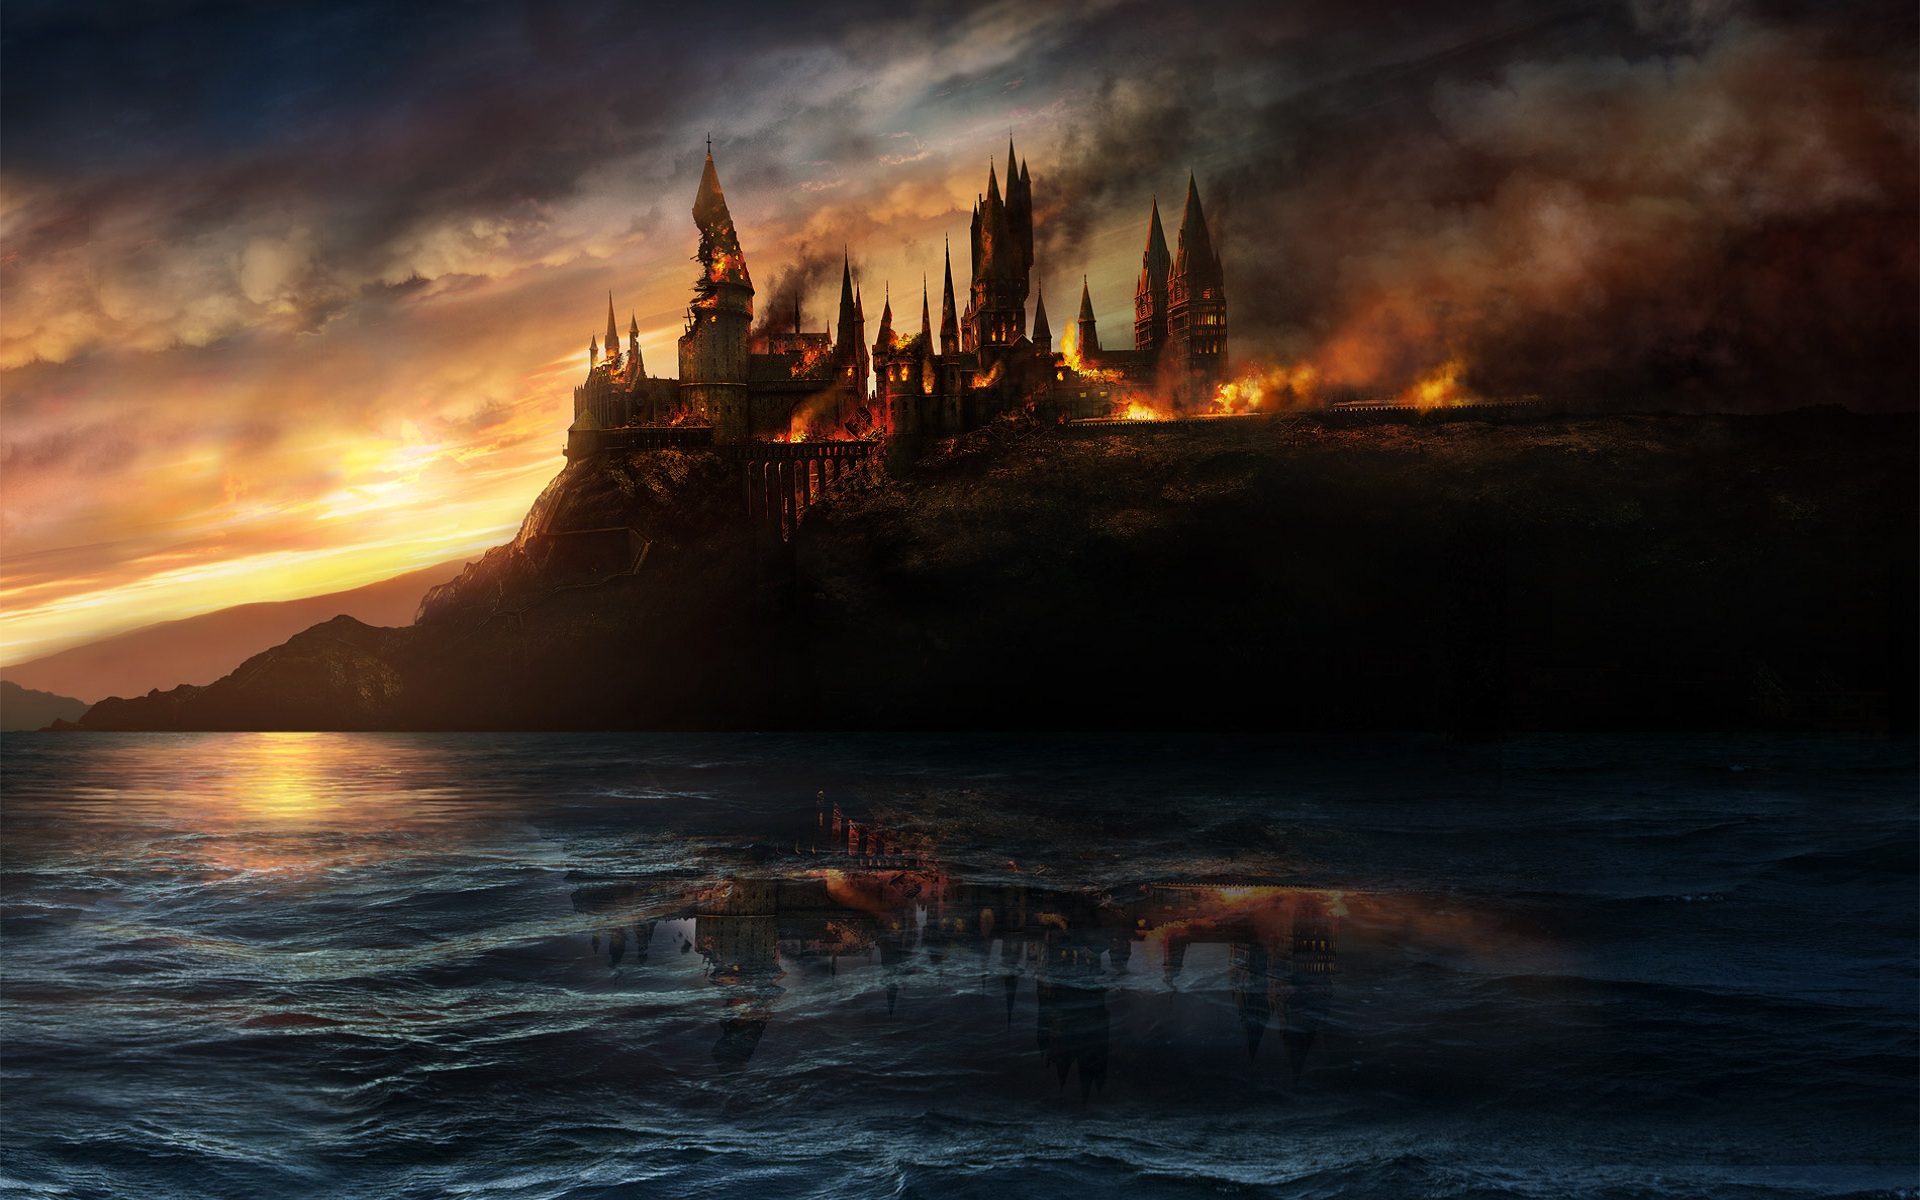 fire, harry potter, smoke, hogwarts castle, movie, harry potter and the deathly hallows: part 1, castle 1080p